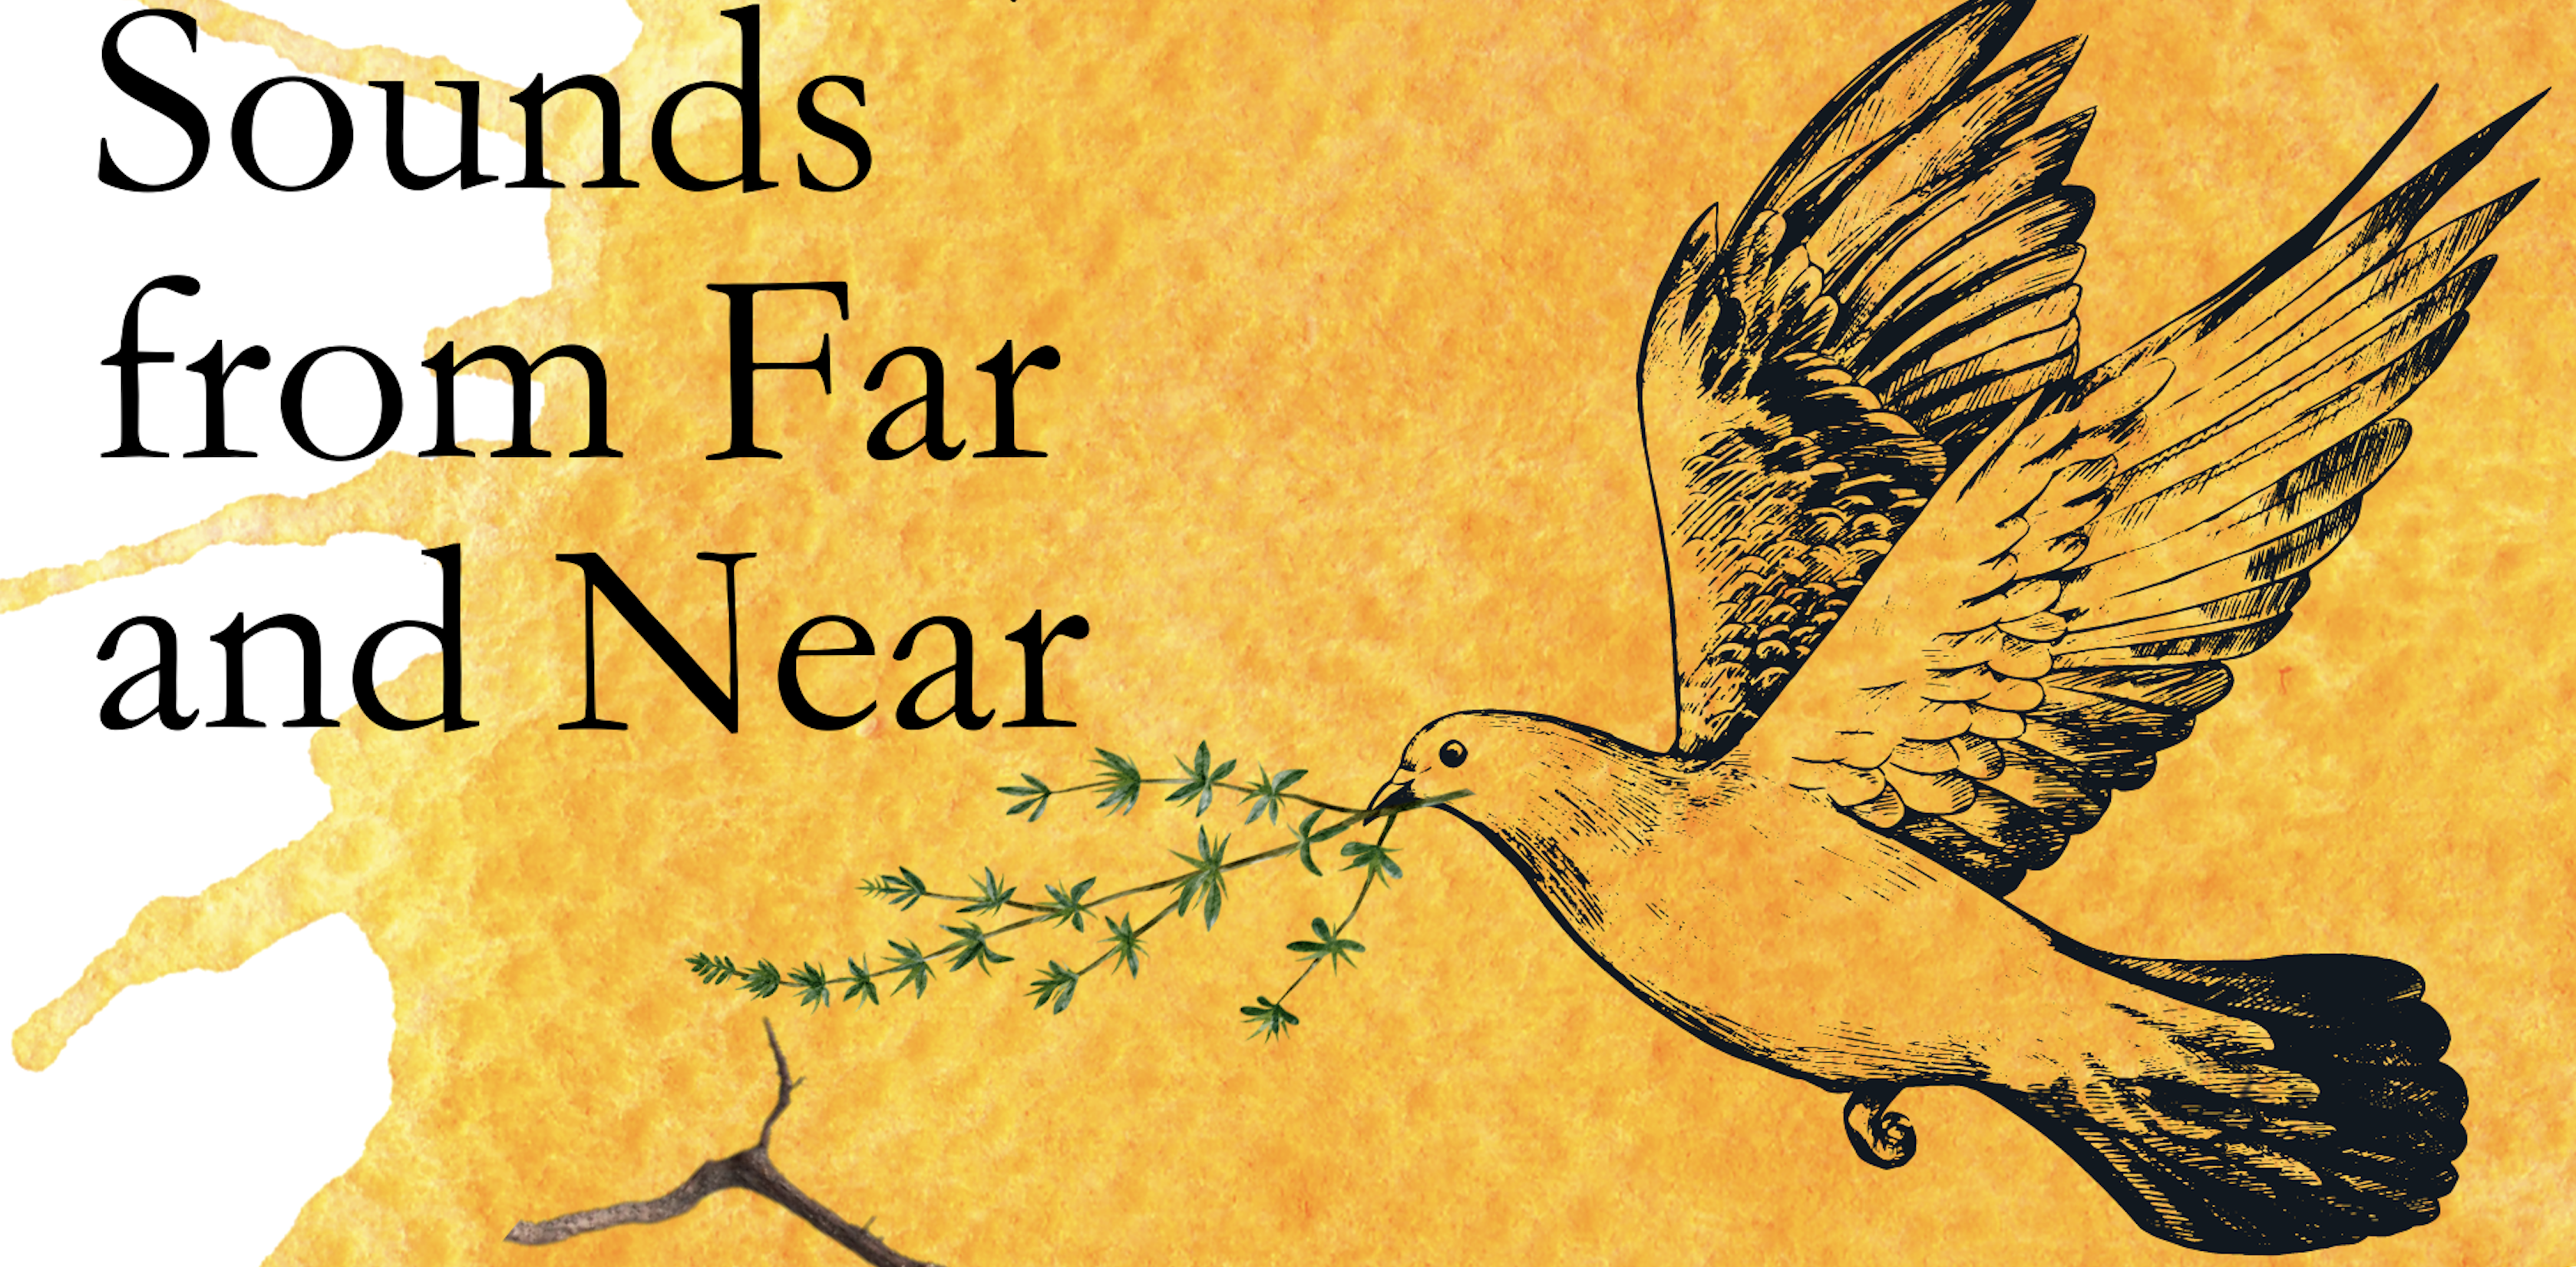 Linden Singers of Hawke’s Bay presents a concert “Sounds from Far and Near”